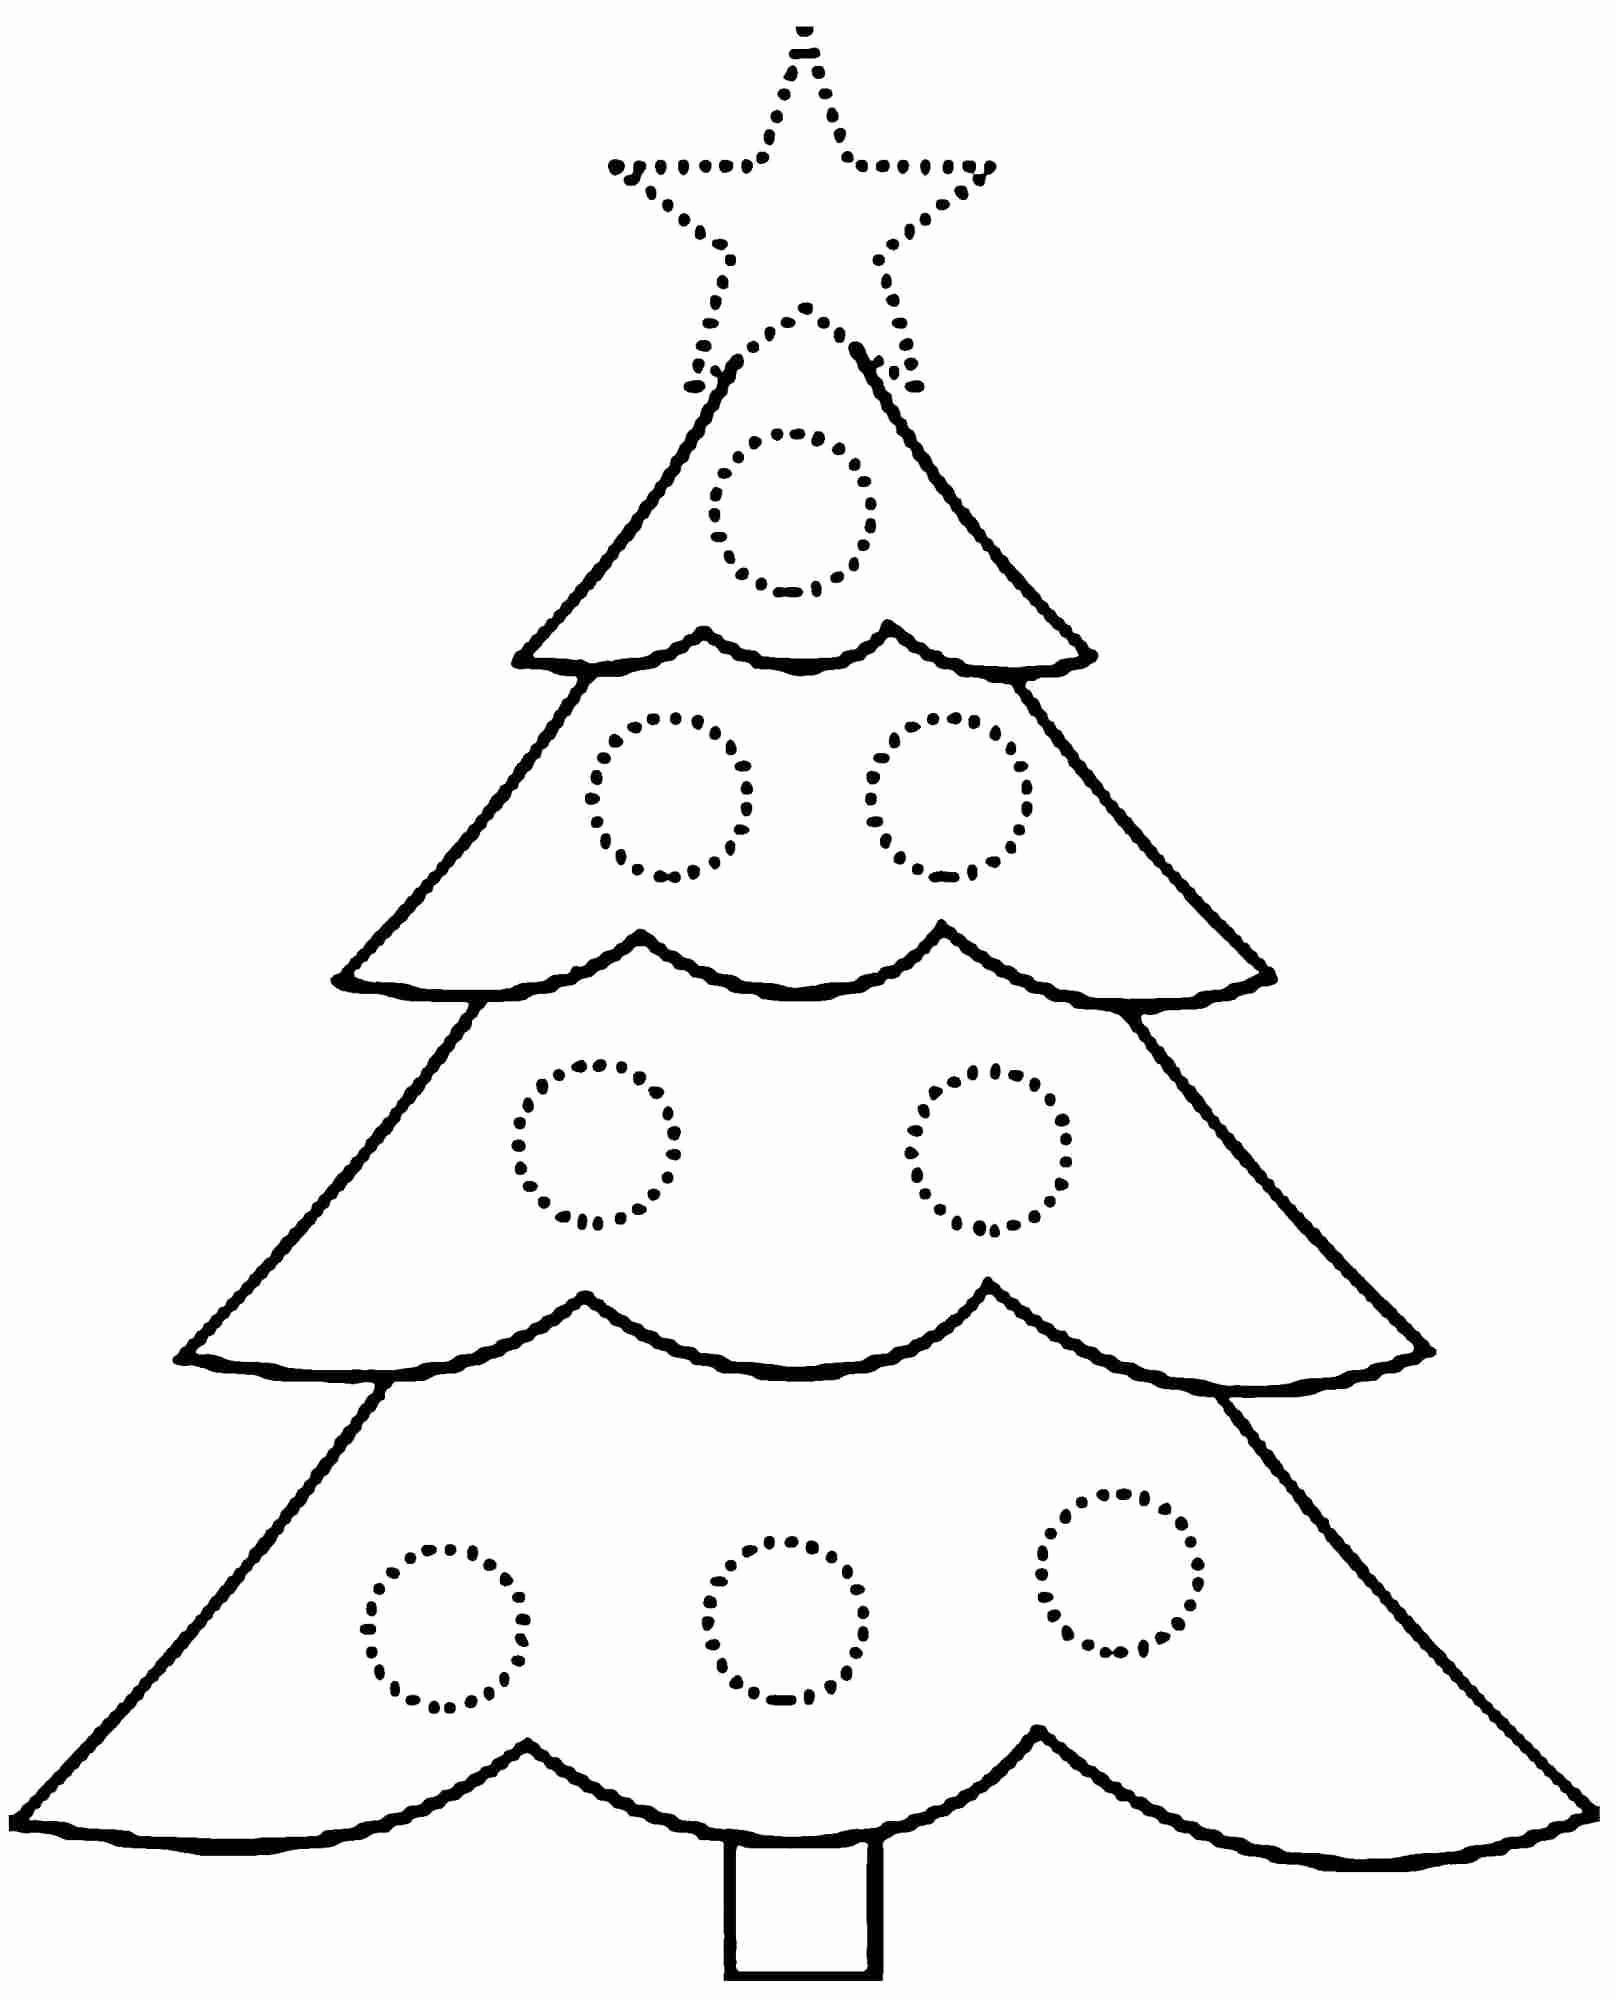 Coloring Pages Christmas Holly Best Free Printable Christmas Tree - Free Printable Christmas Tree Ornaments Coloring Pages